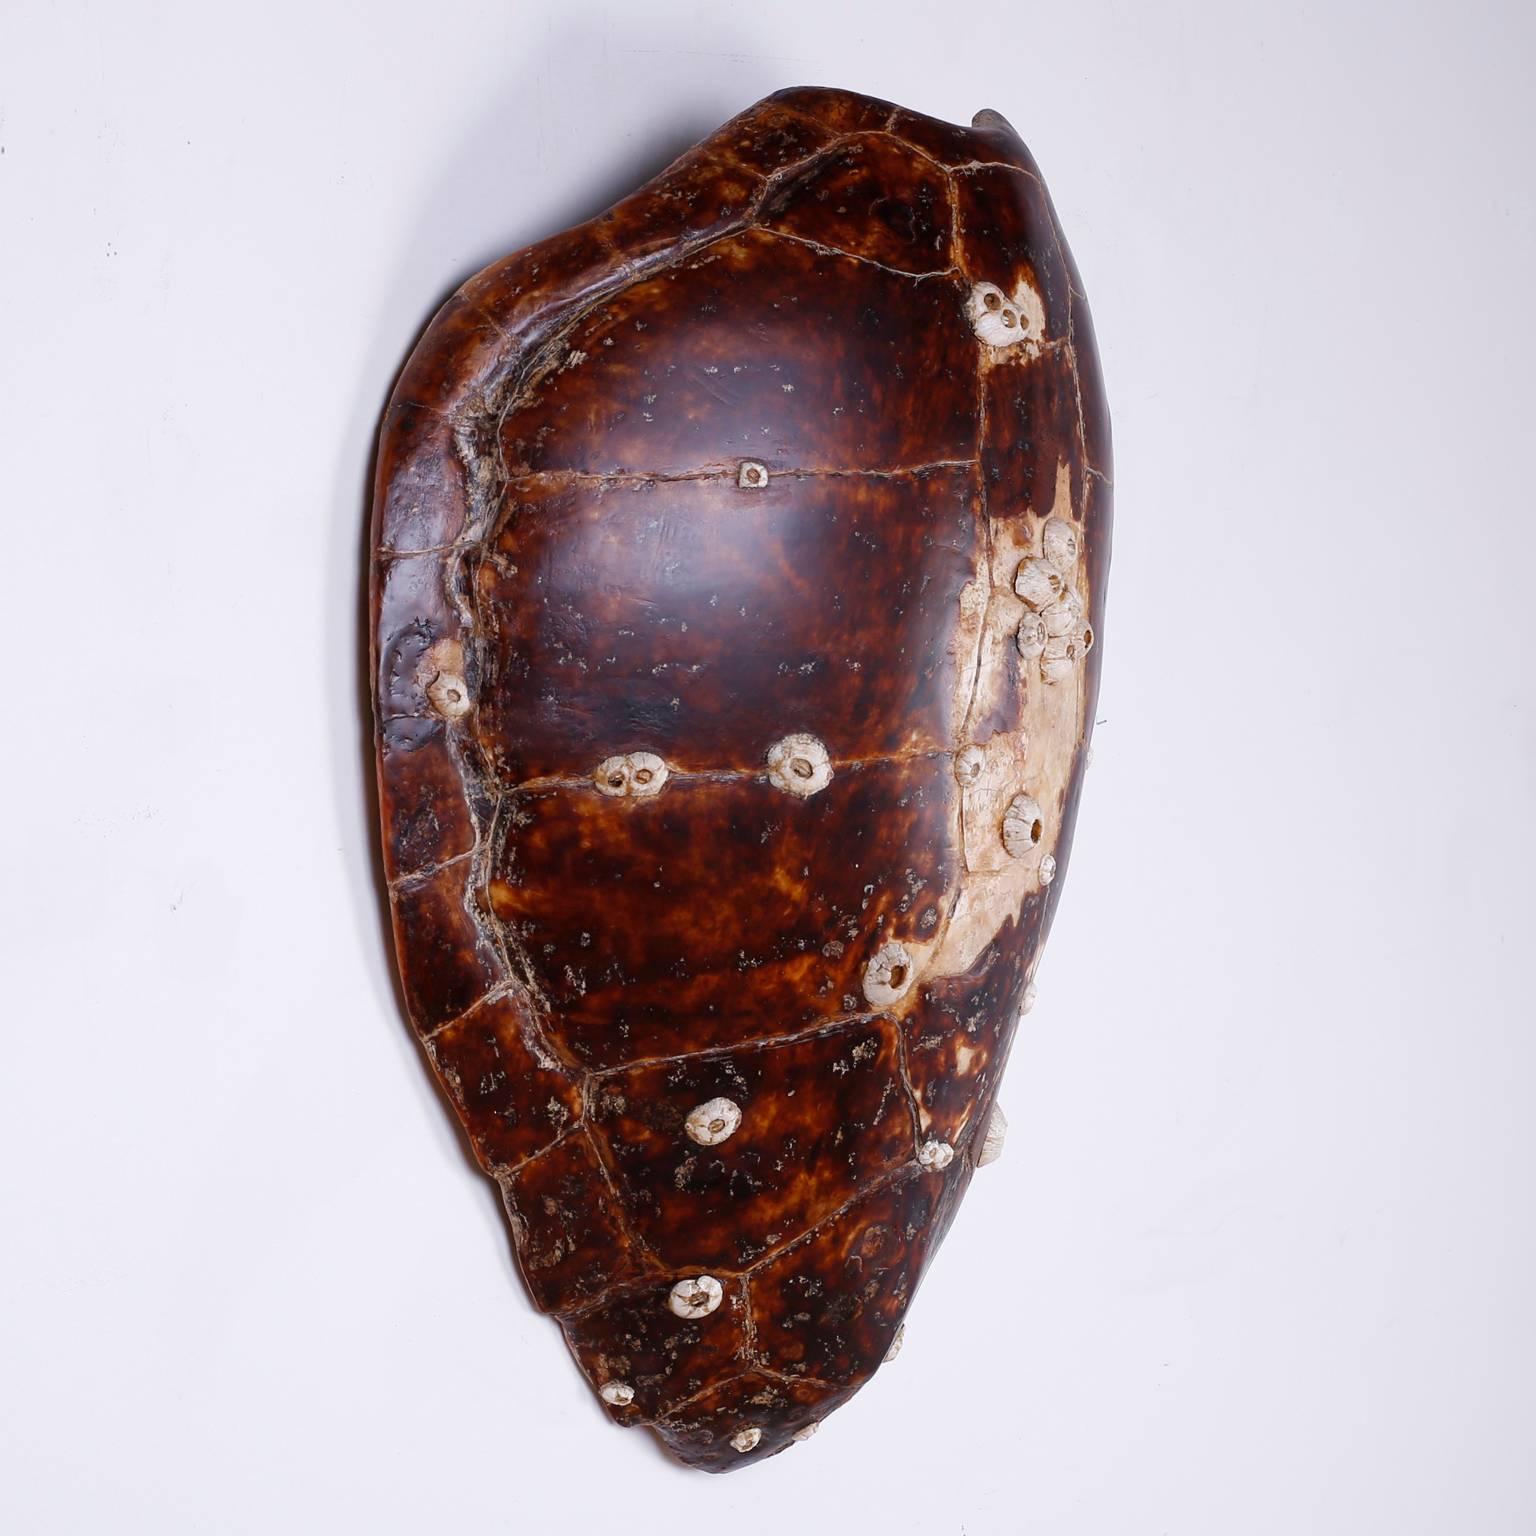 The iconic form of the turtle shell, out done only by its own distinct variegated colors and lustrous glow. Attached to this shell are barnacles that hitched a ride a long time ago.